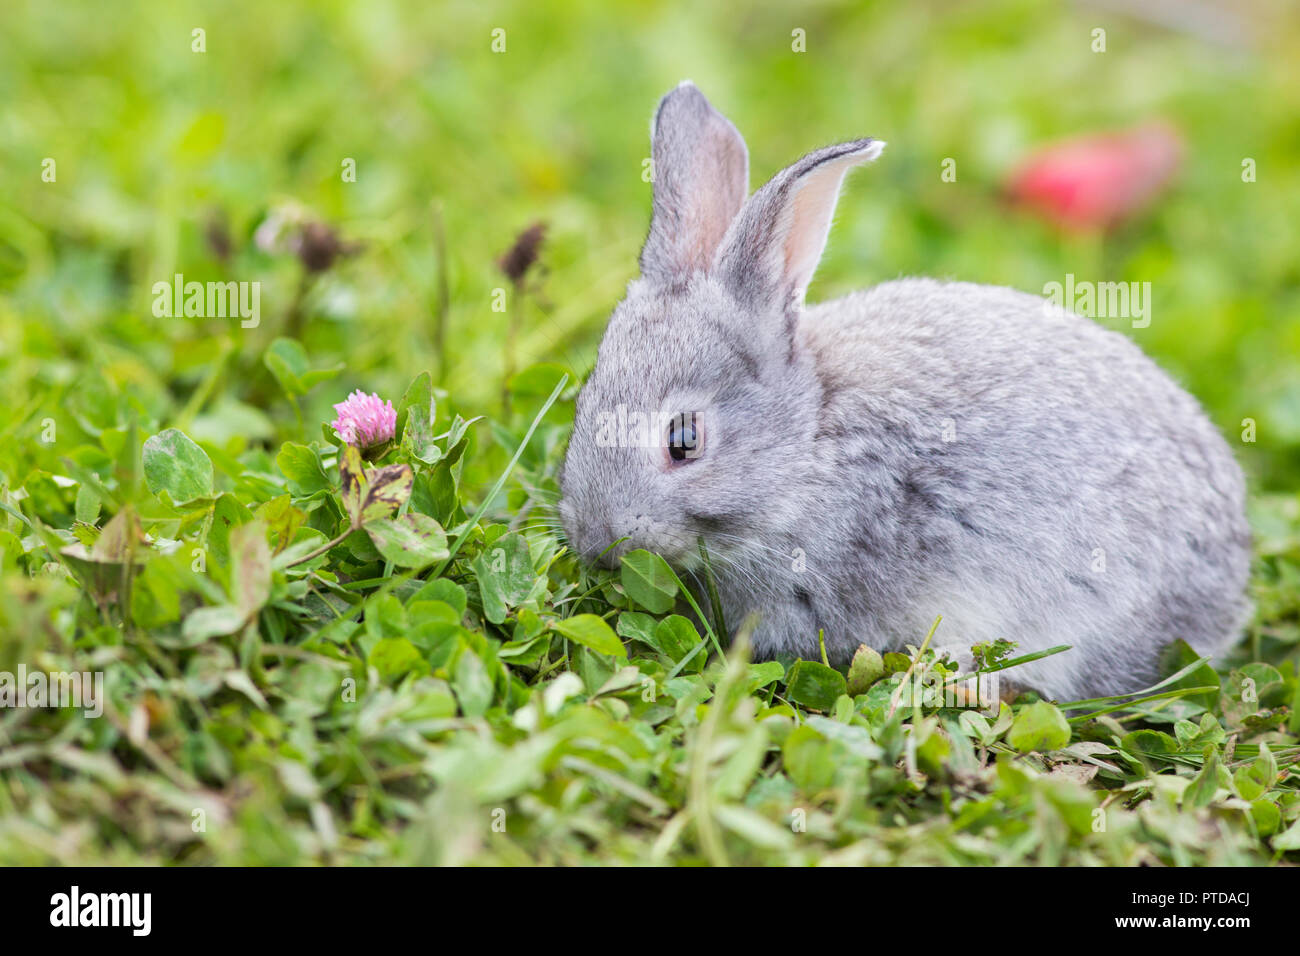 Cute Baby Bunnies In Nature Stock Photo 221569730 Alamy